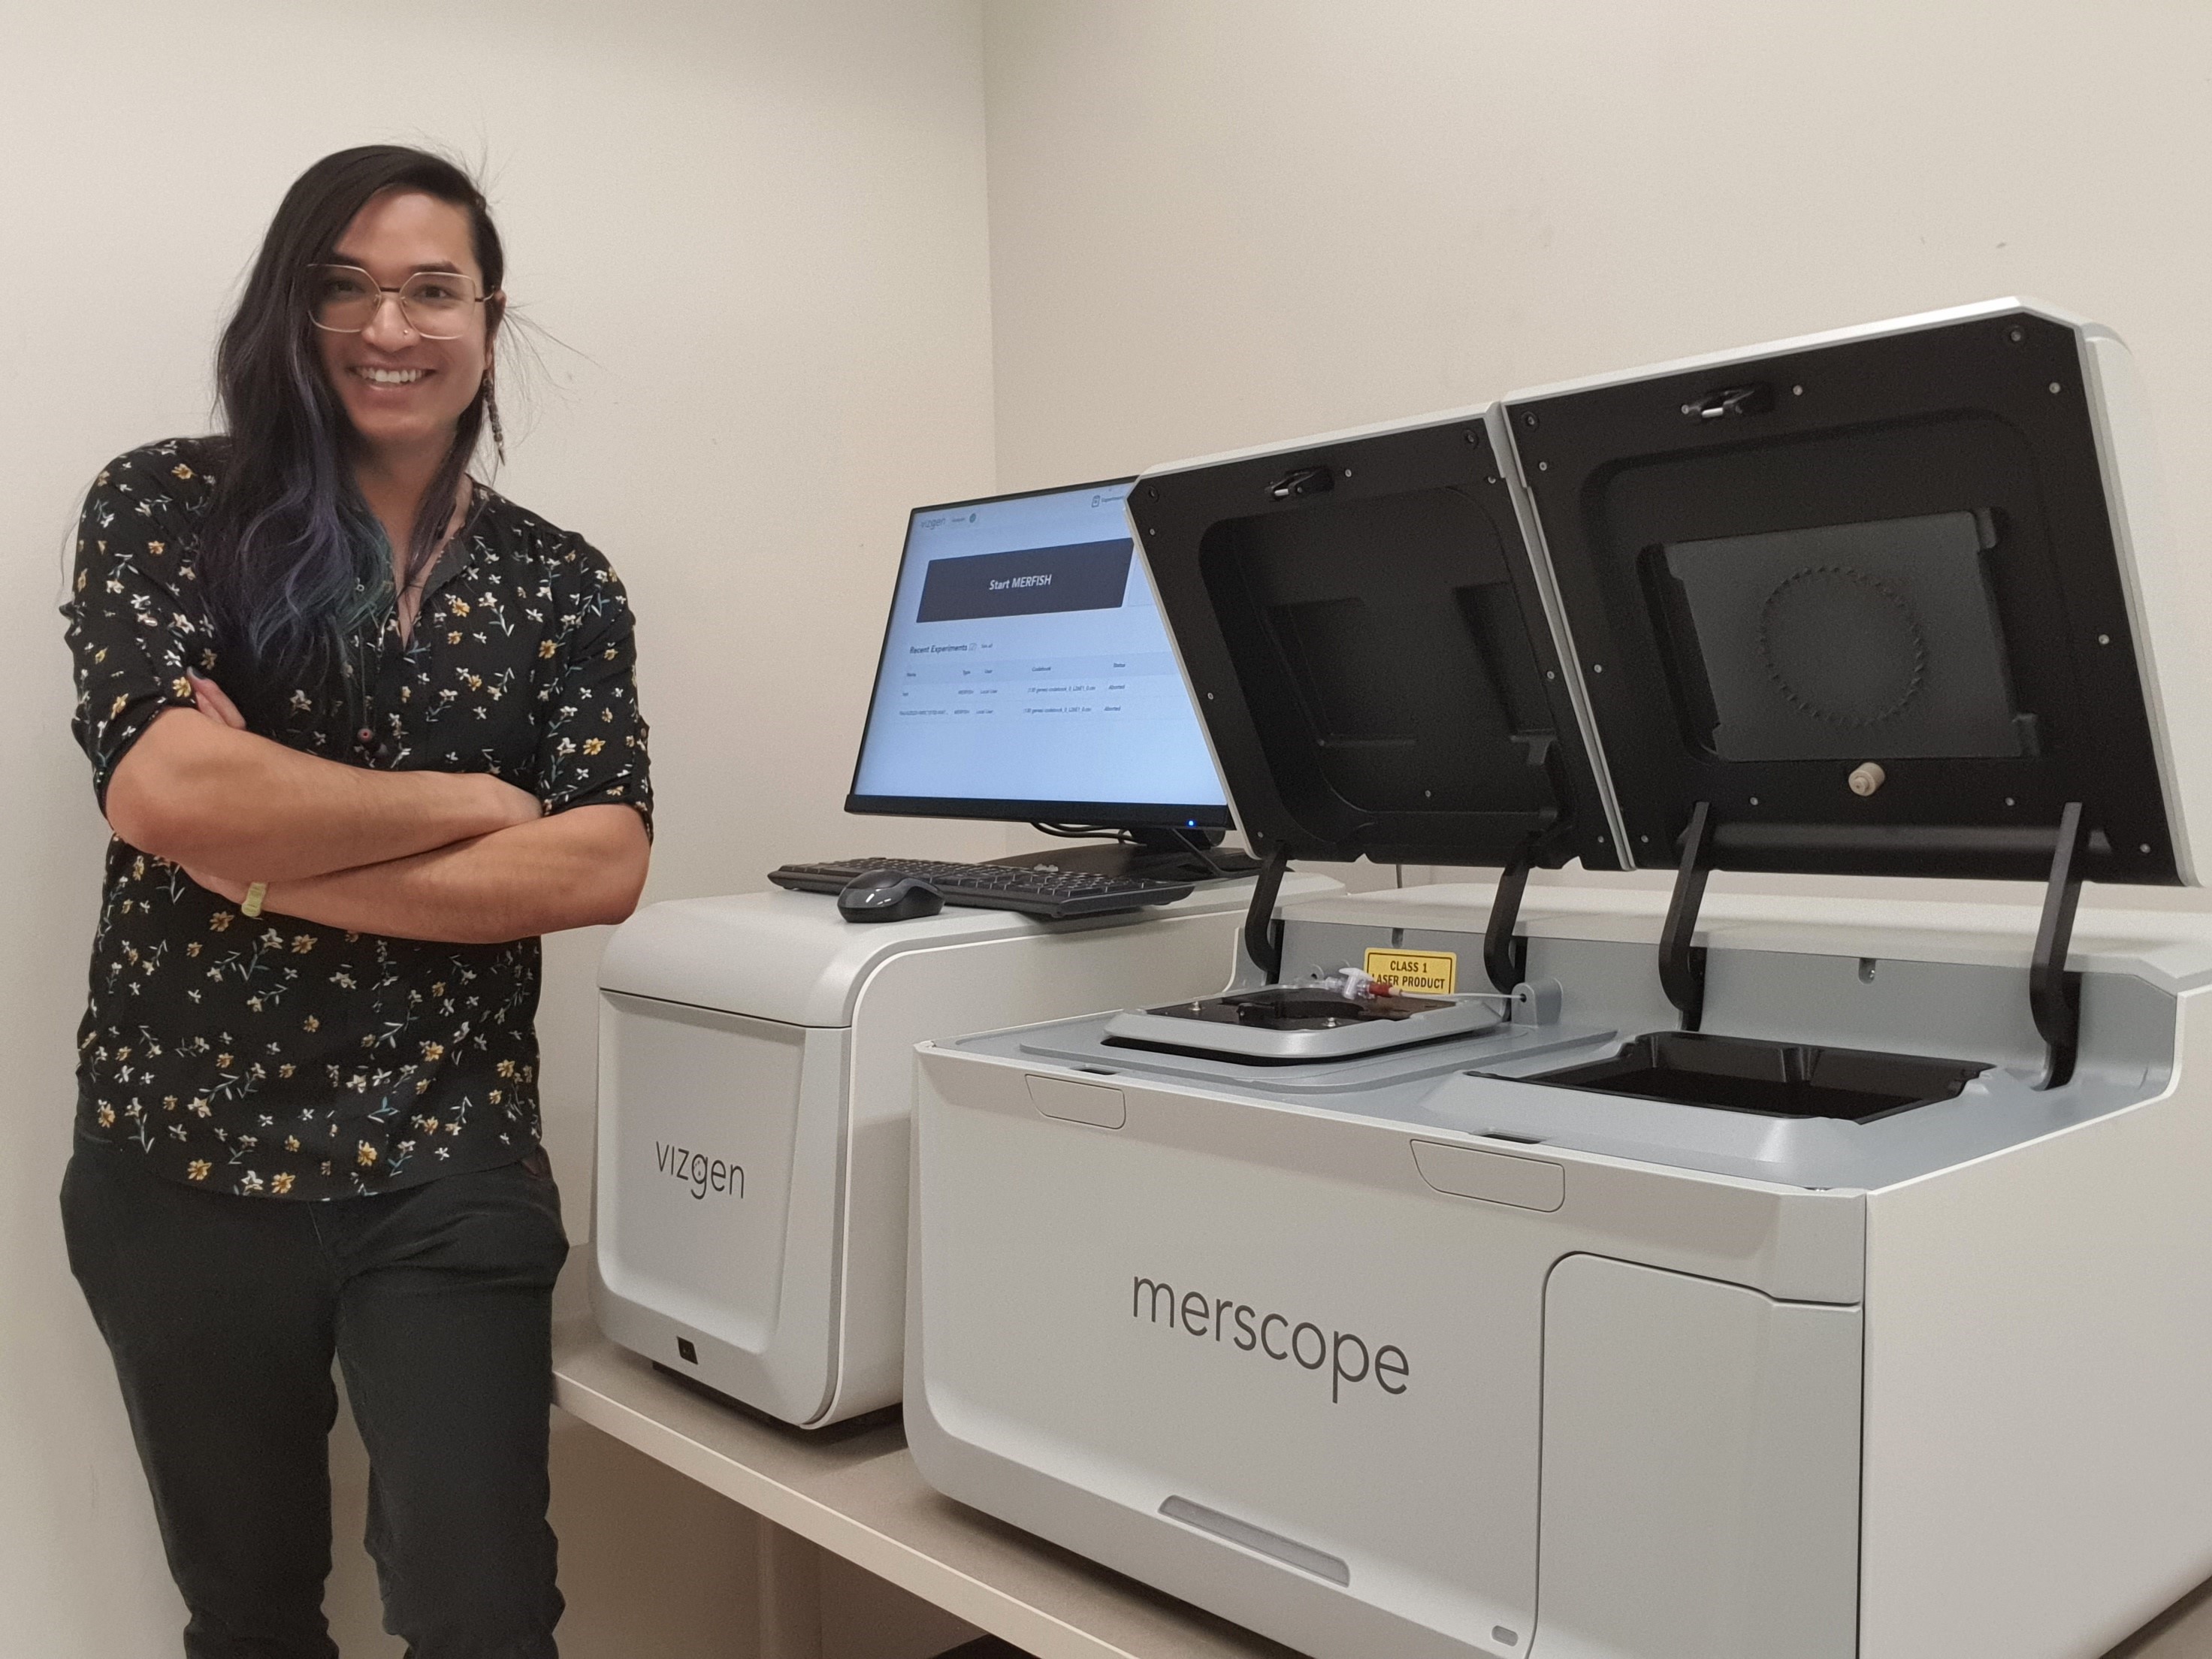 Mike Wong with Merscope